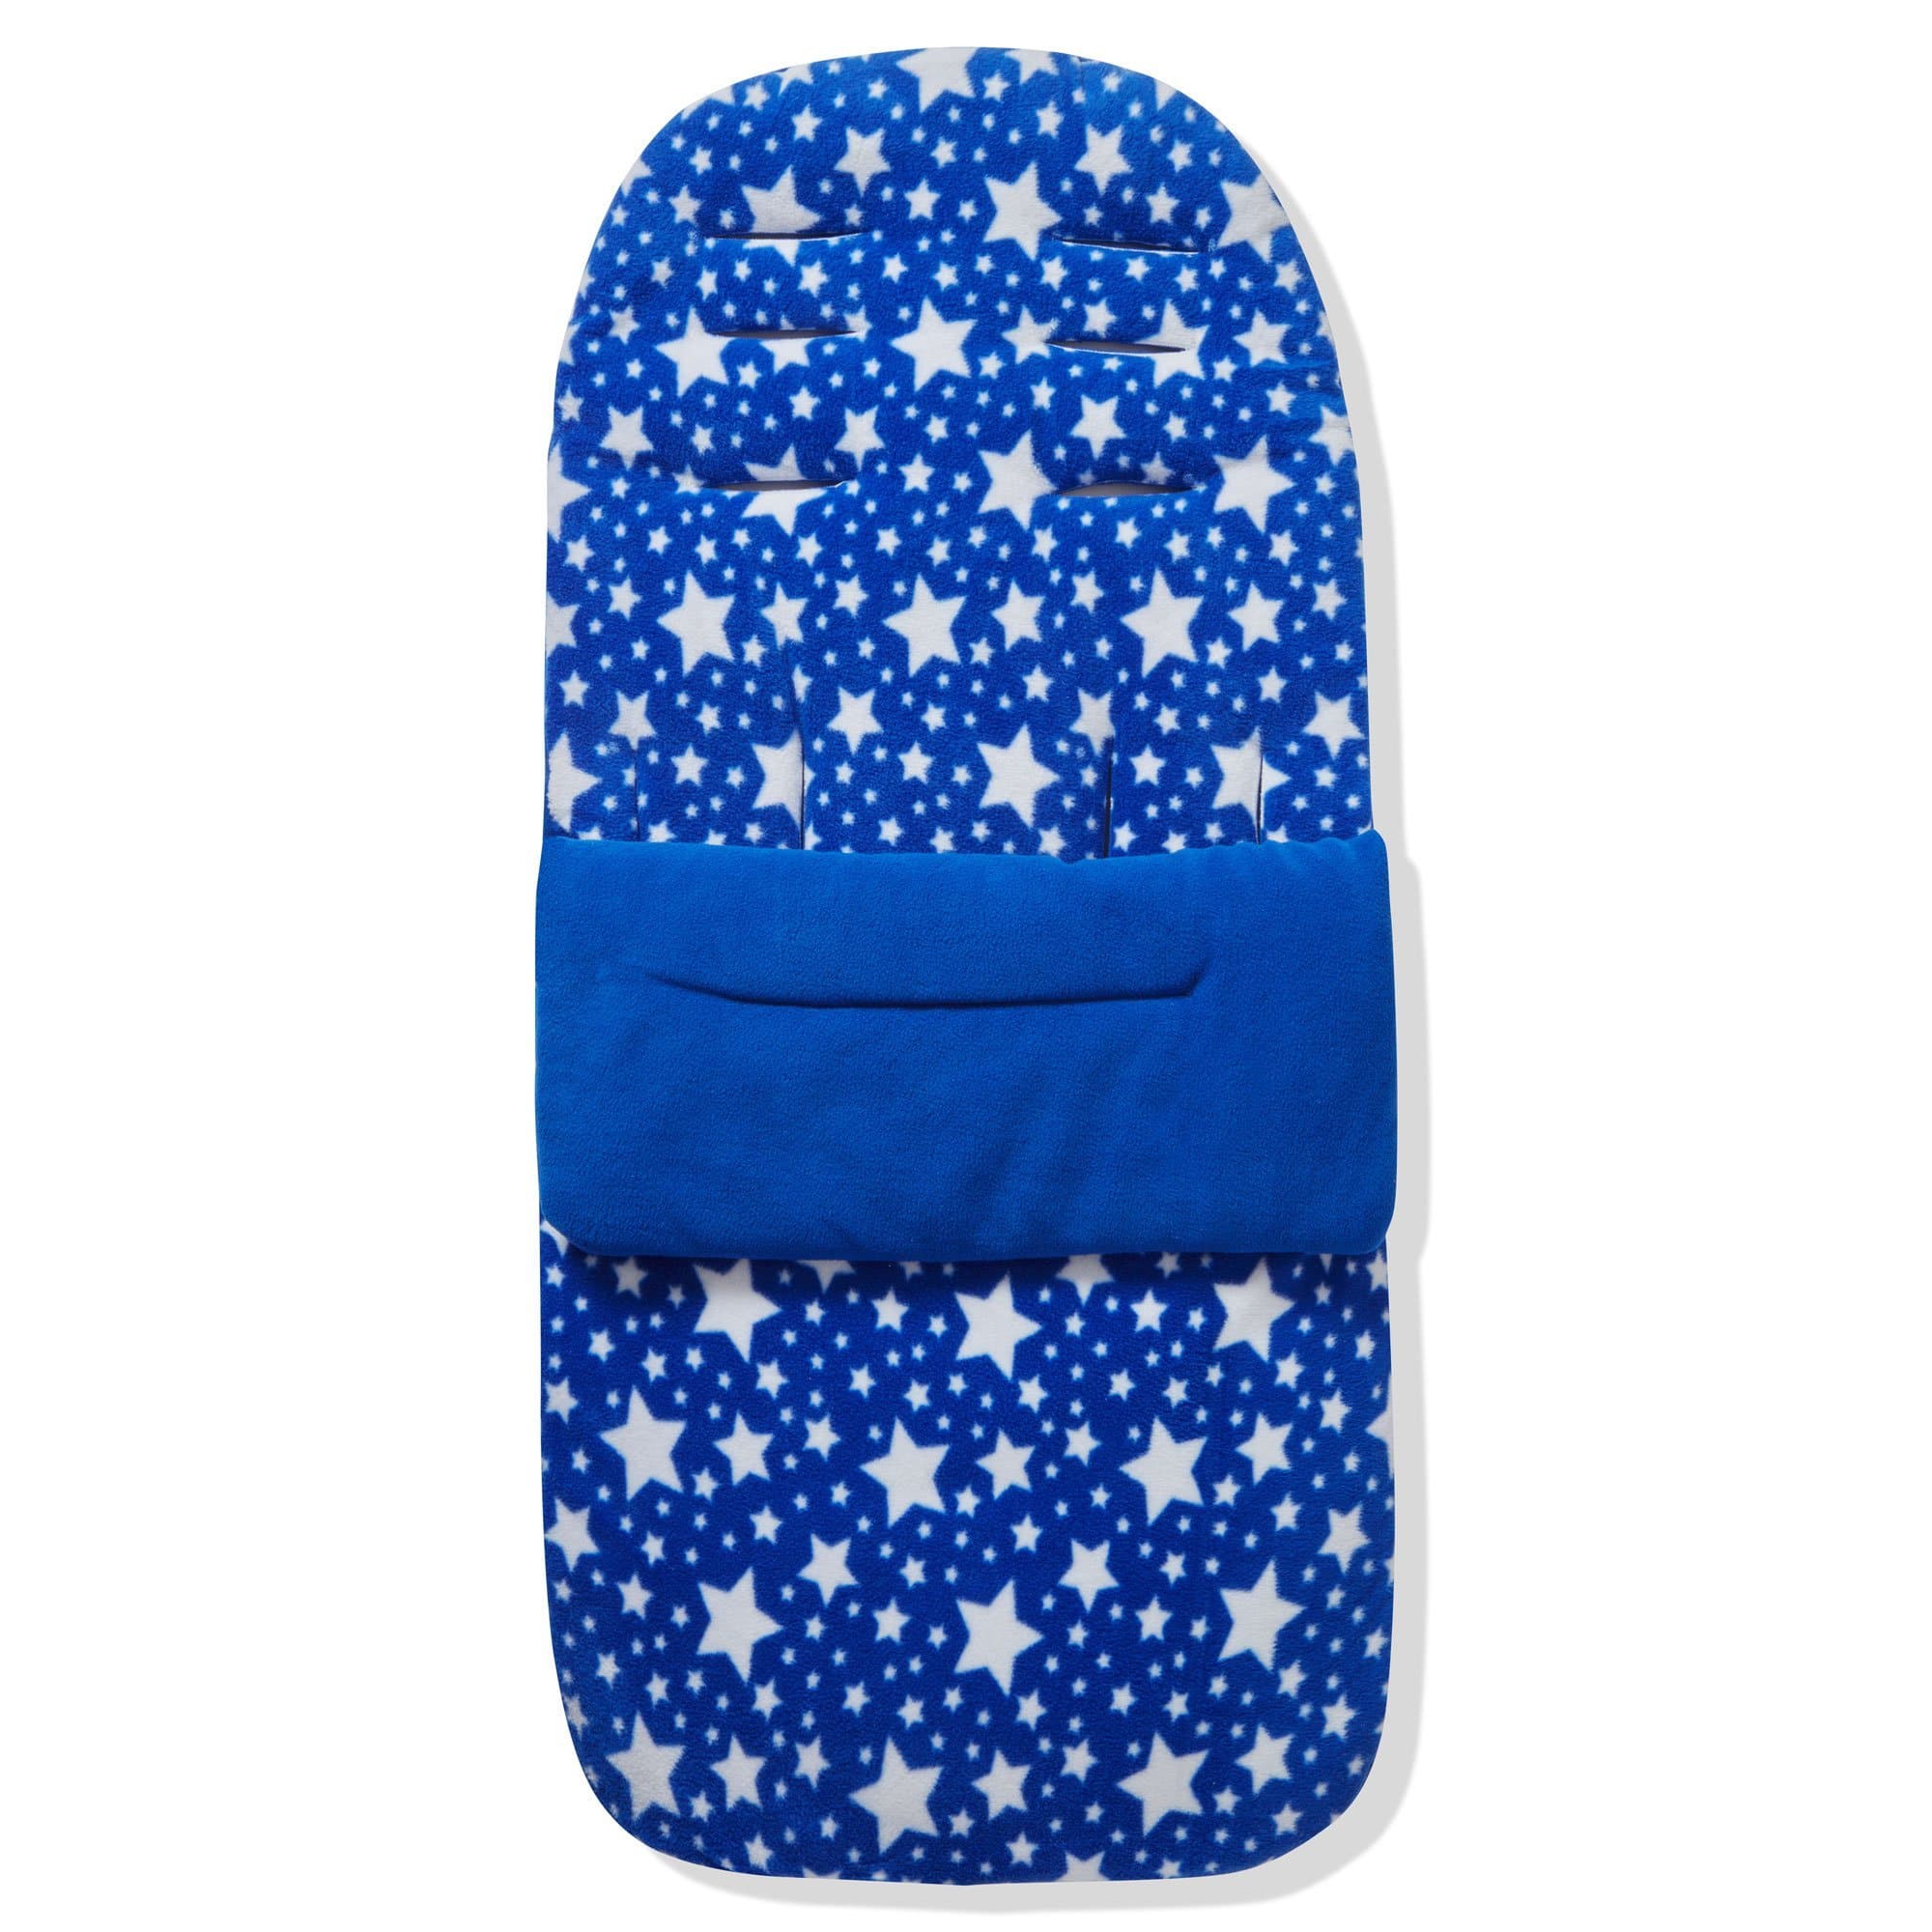 Fleece Footmuff / Cosy Toes Compatible with Safety 1st - For Your Little One